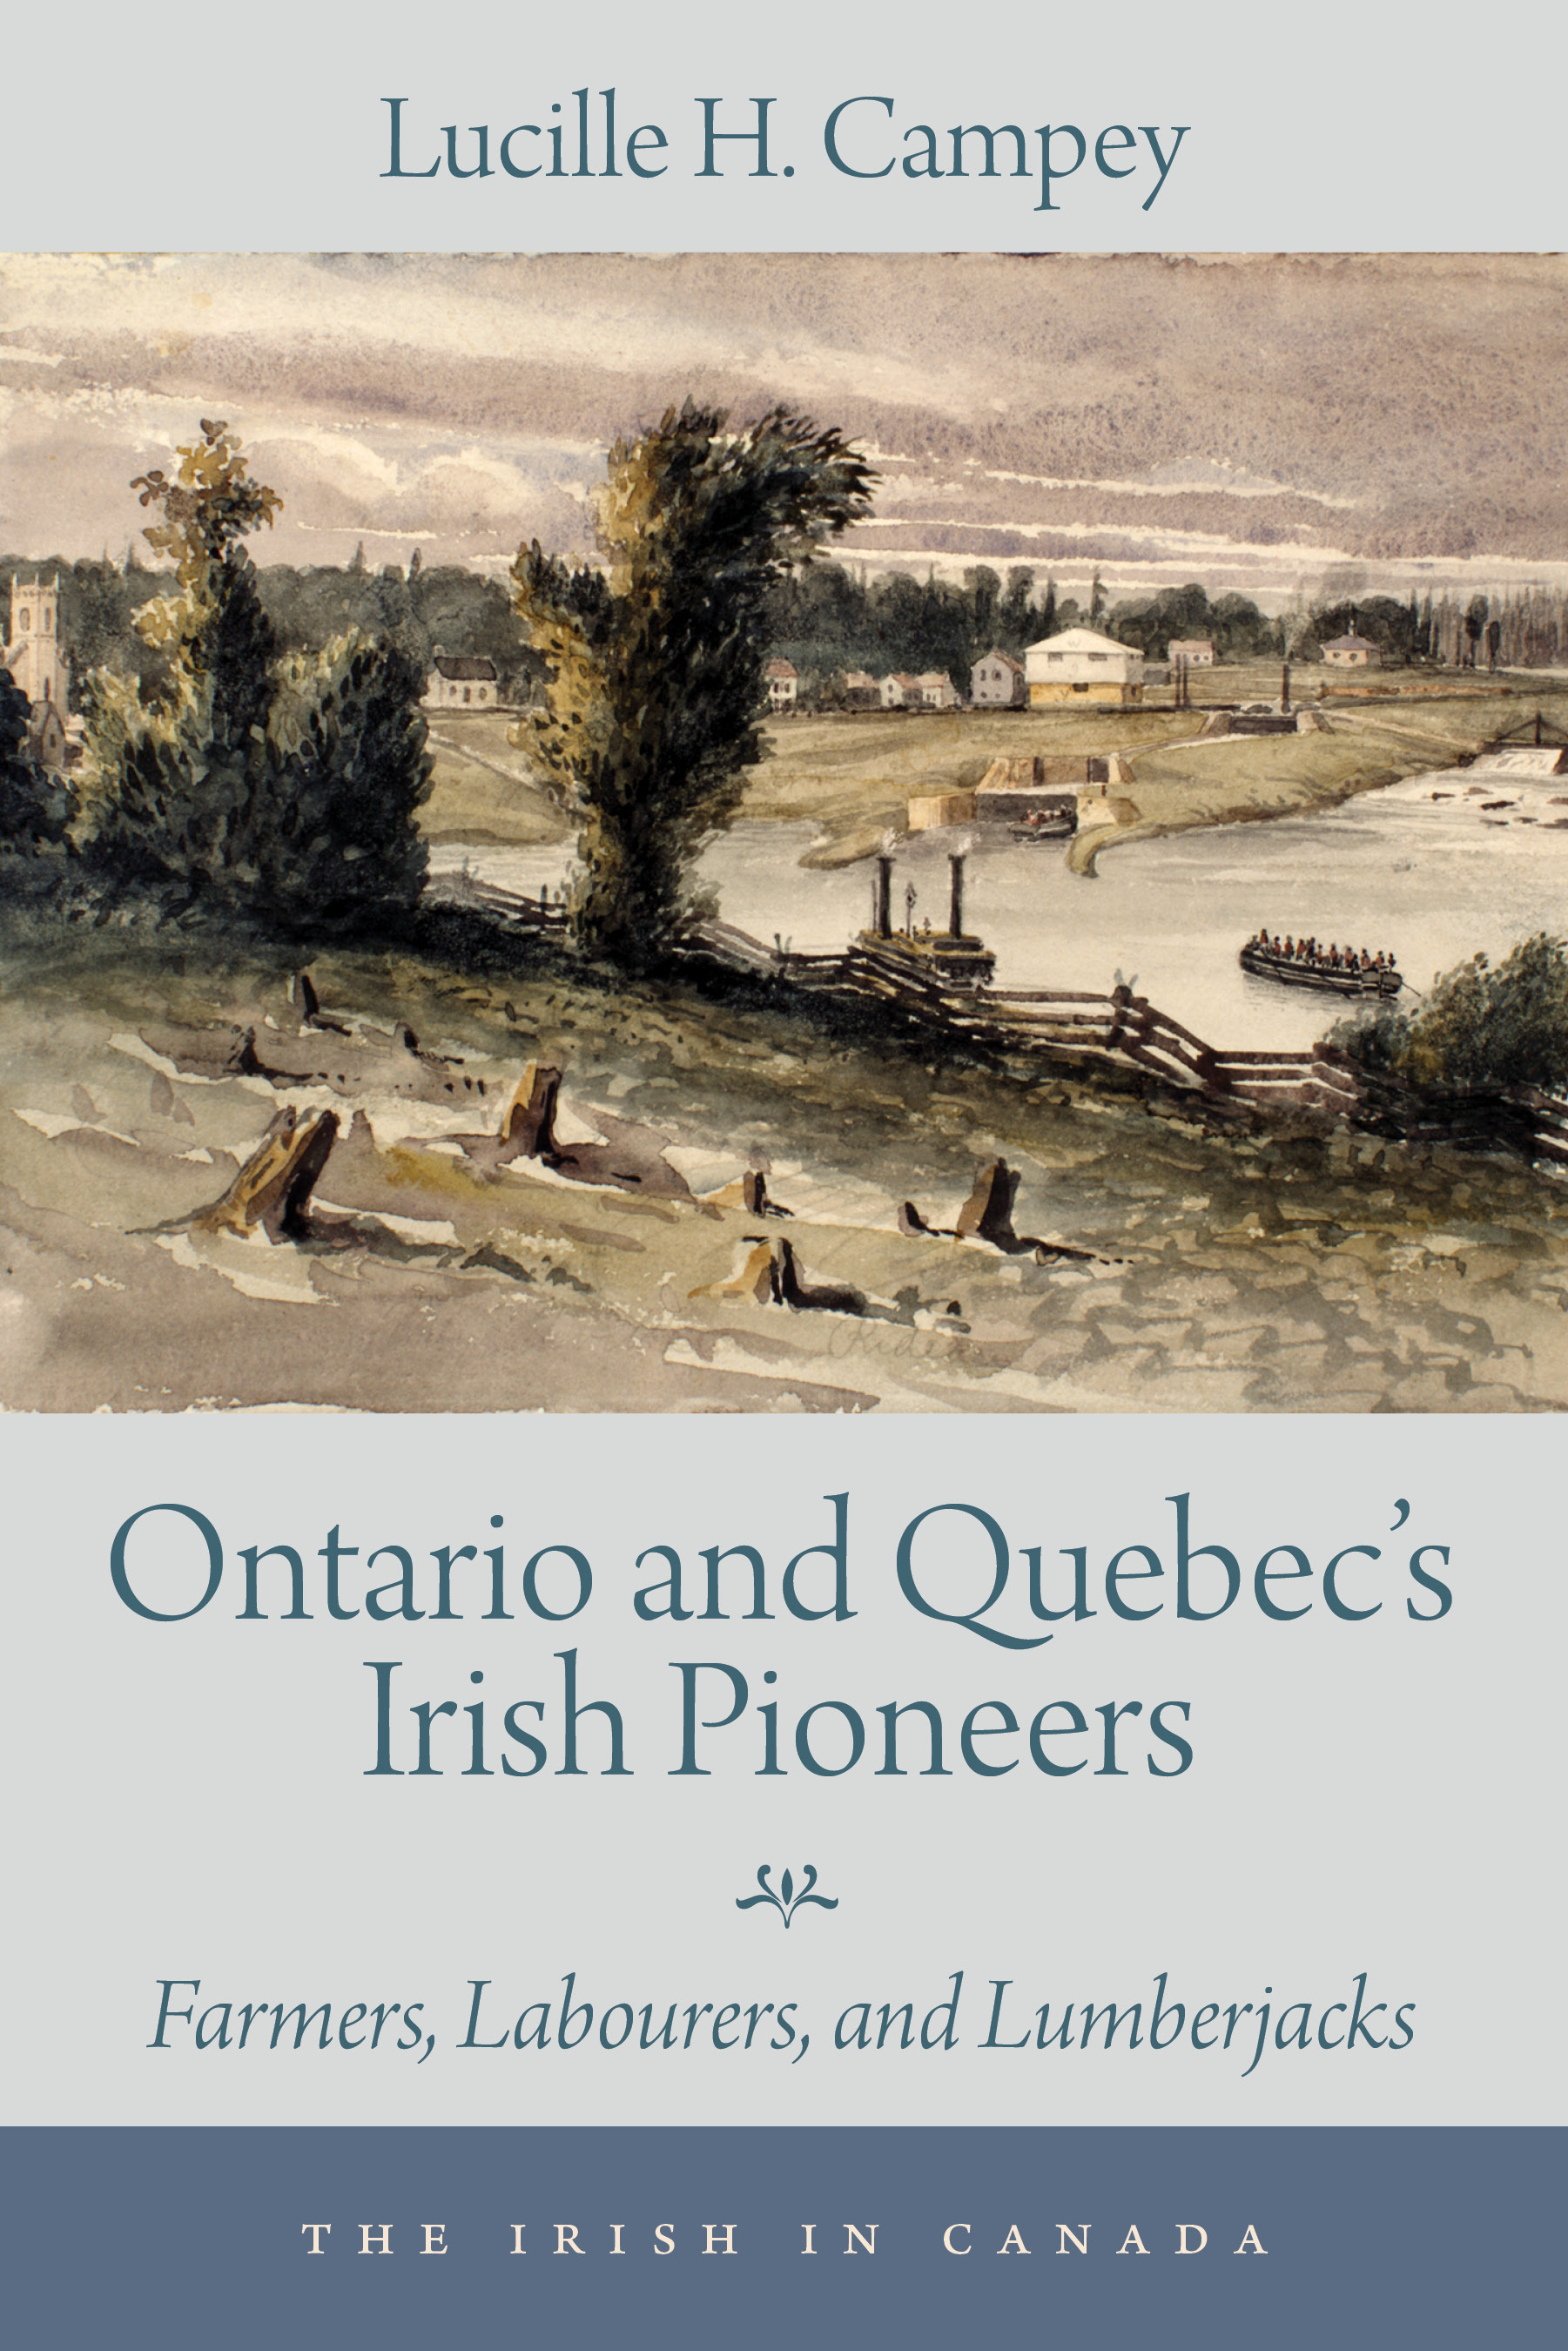 Ontario and Quebec’s Irish Pioneers : Farmers, Labourers, and Lumberjacks | Campey, Lucille H.